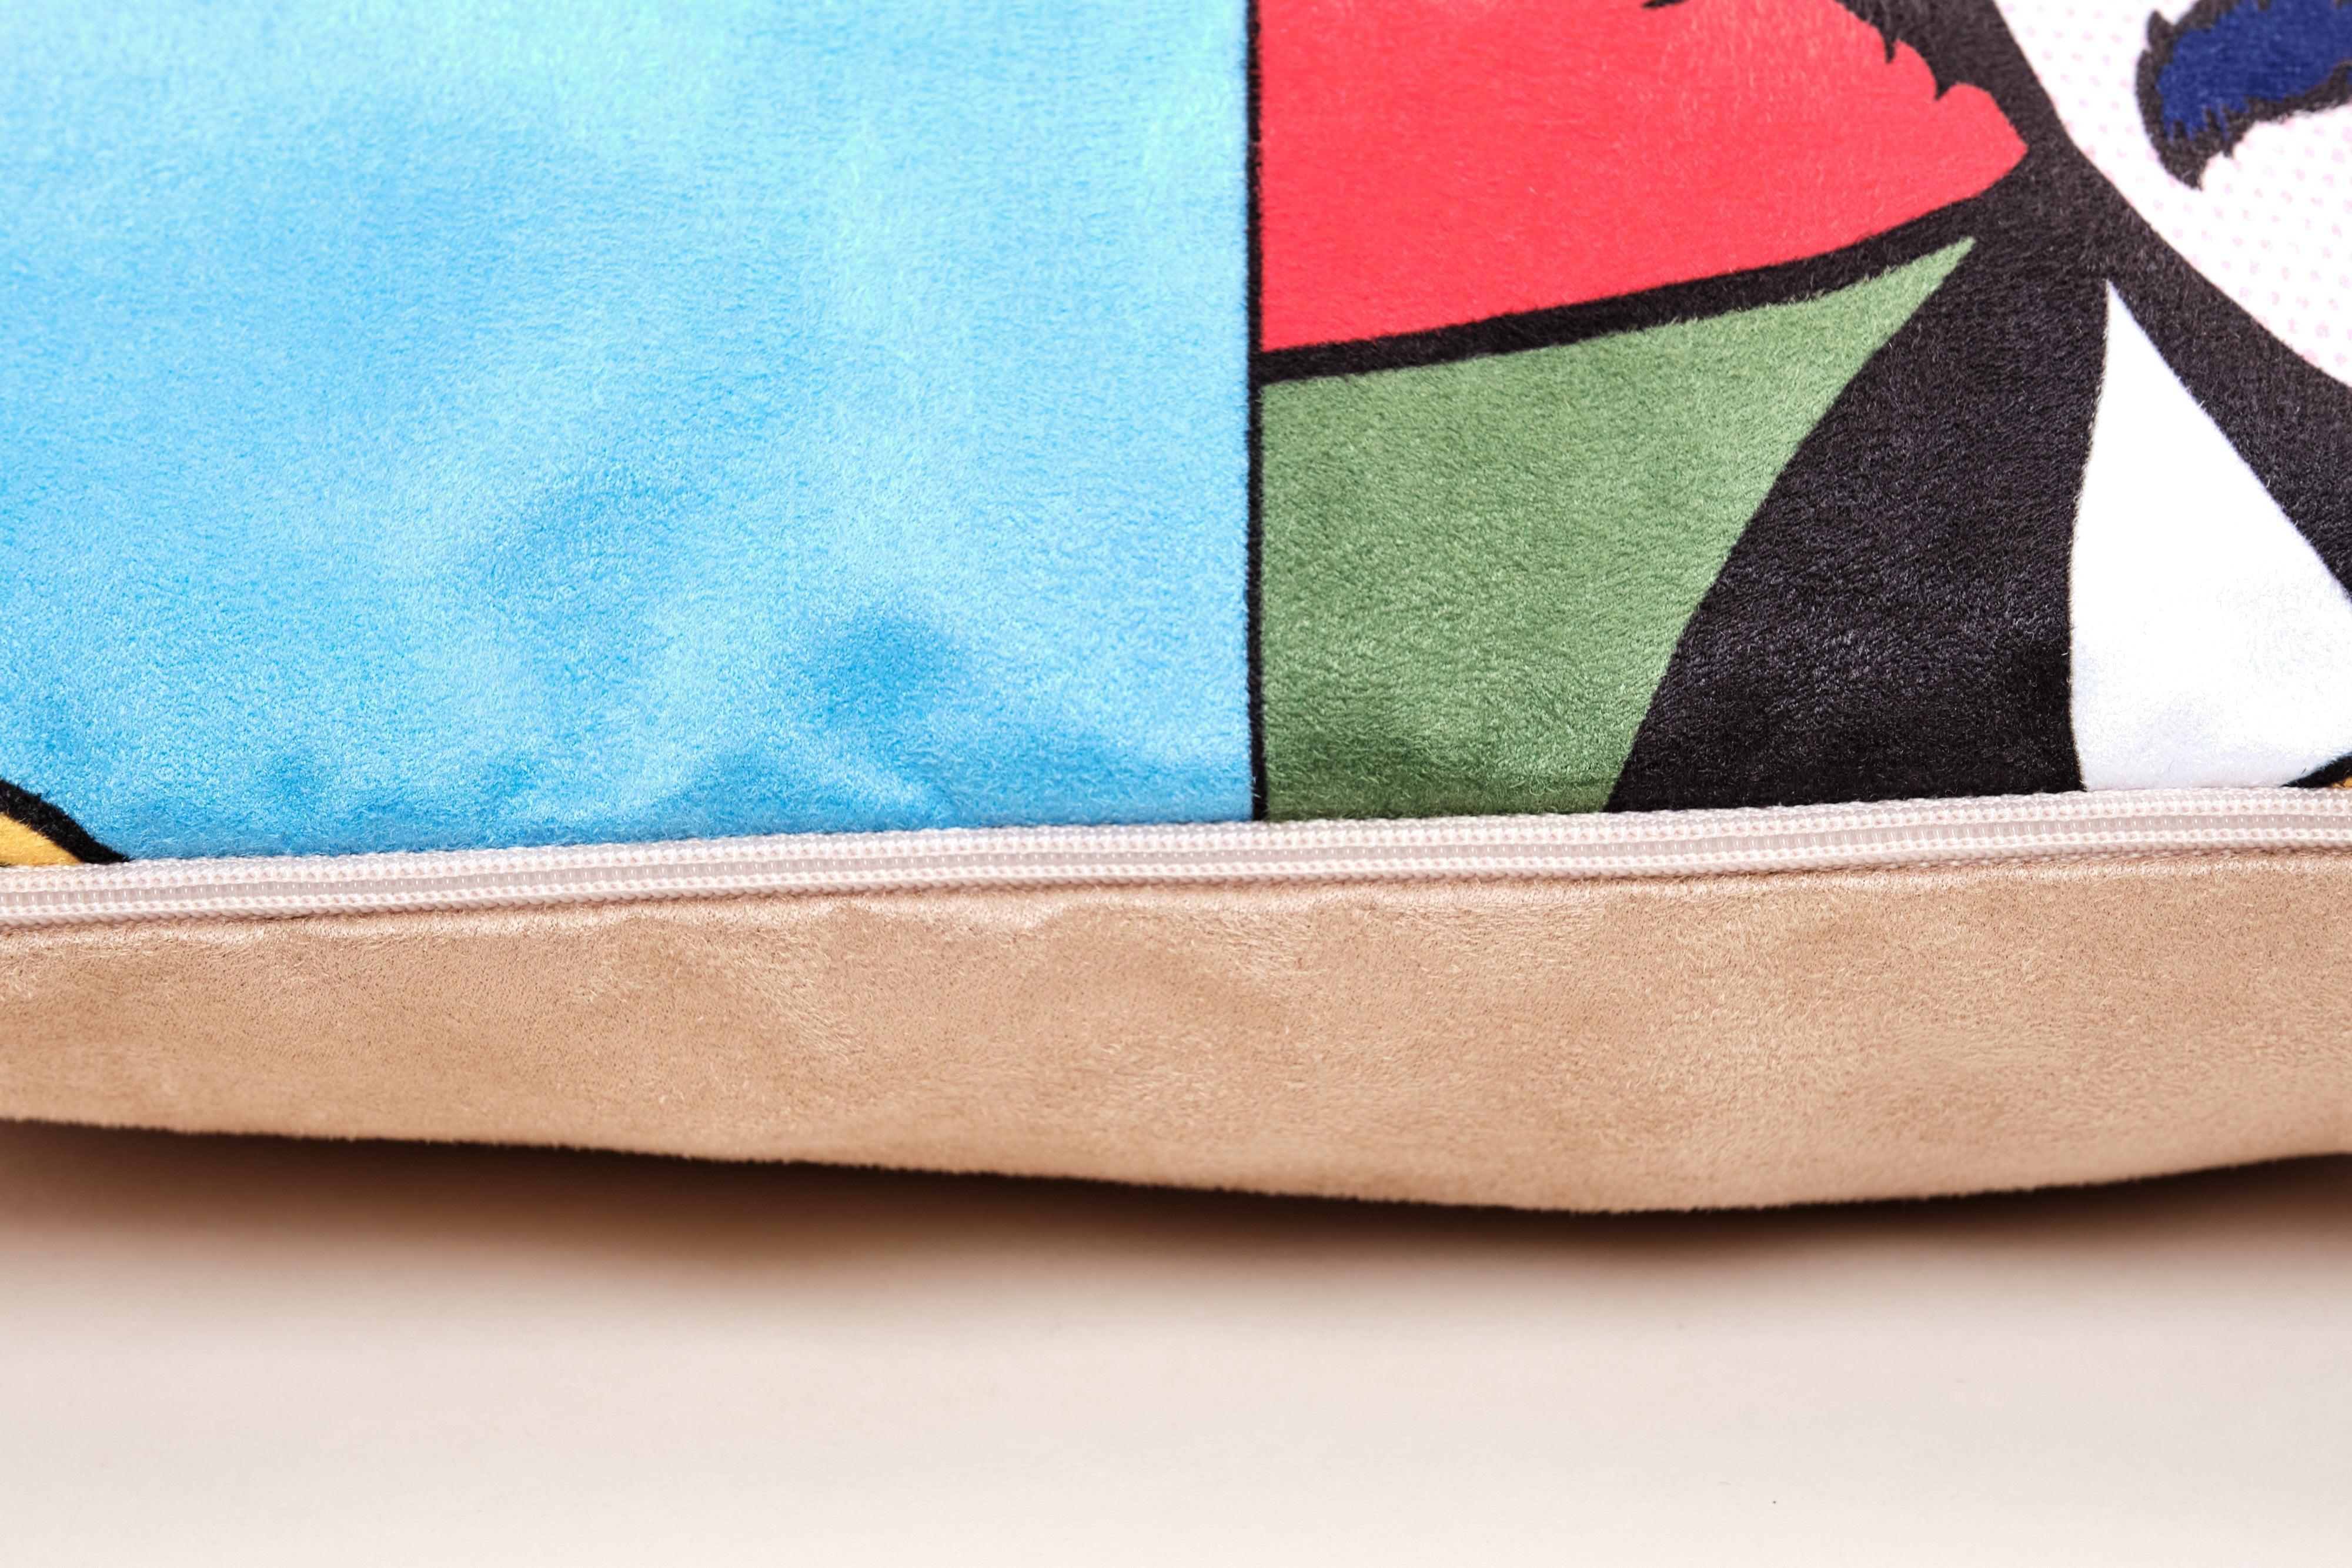 Linear Motif In Three Moviments -TATE - Victor Pasmore Cushion - Handmade Cushions UK - WeLoveCushions